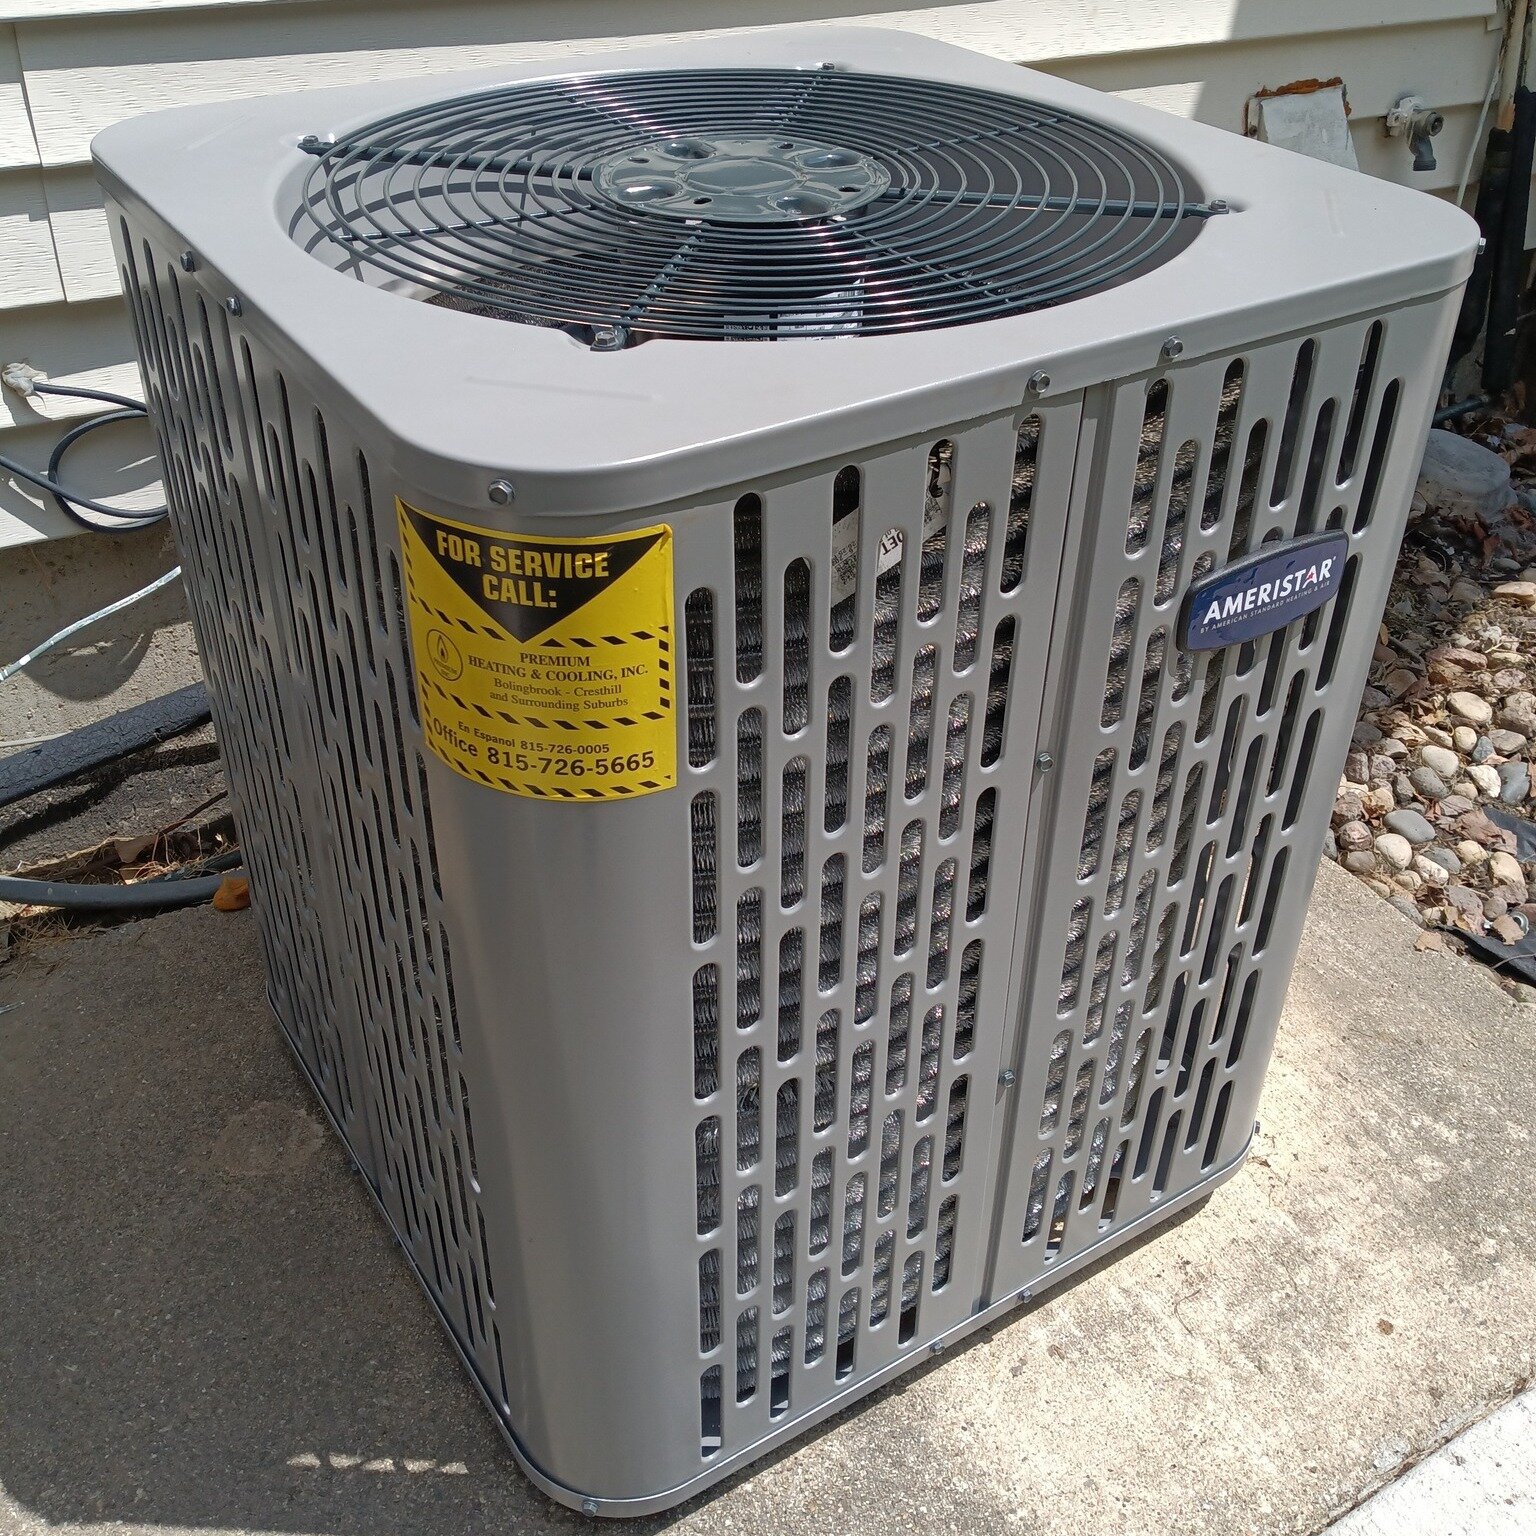 New Ameristar condenser and coil installation for our residential customer ❄❄

It's going to be a hot weekend, this customer is already one step ahead. ✅

Call Premium Heating &amp; Cooling for all residential HVAC needs today!

☎(815)-726-5665☎
🌎Se